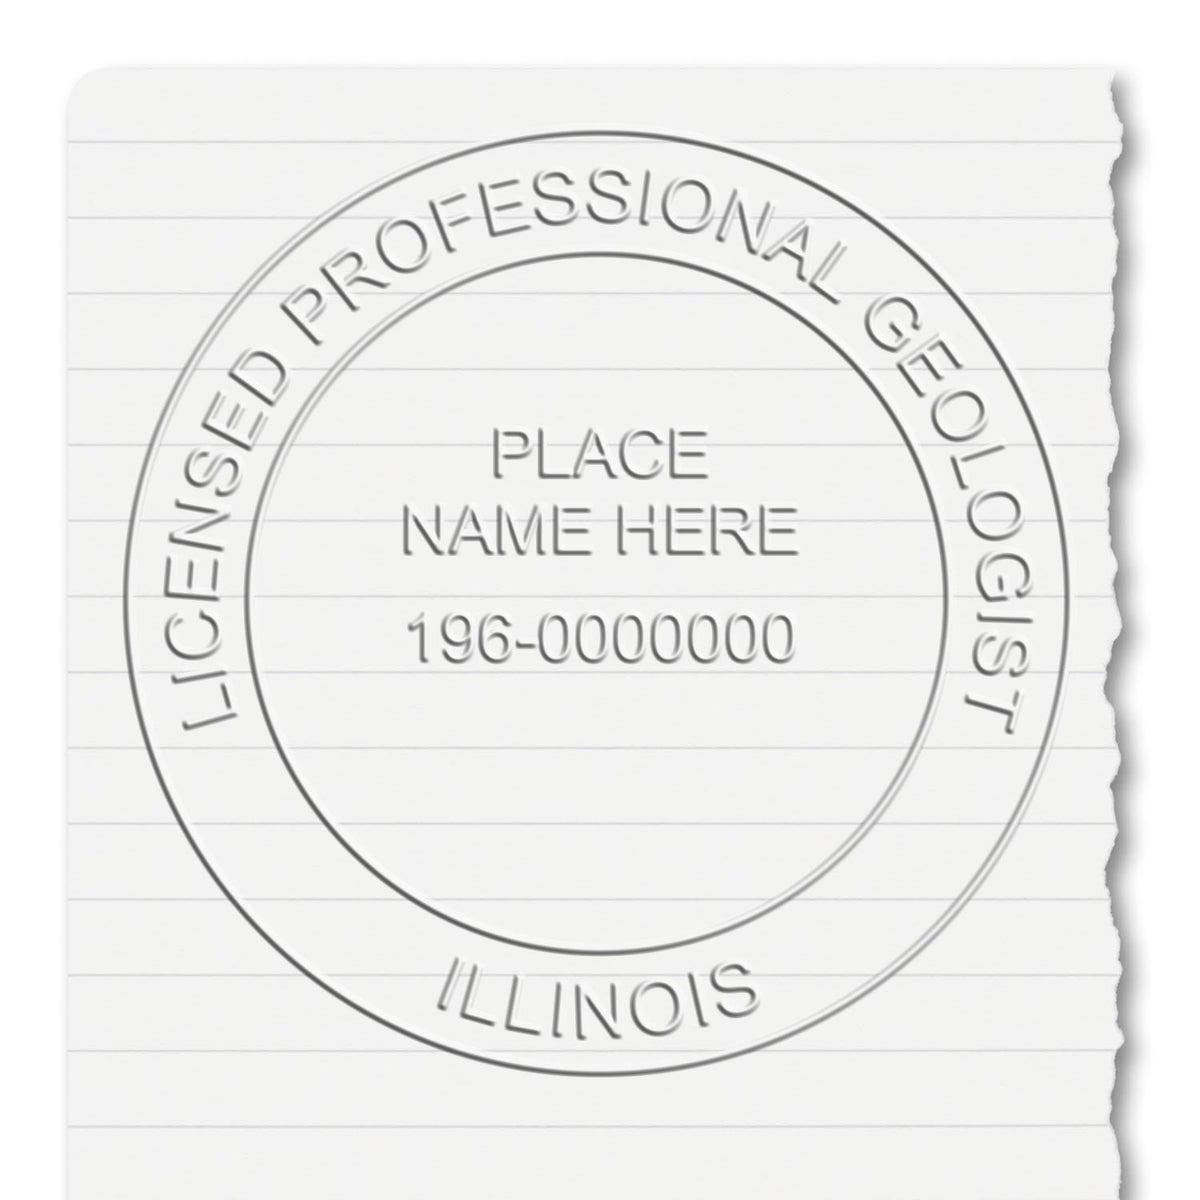 A stamped imprint of the Hybrid Illinois Geologist Seal in this stylish lifestyle photo, setting the tone for a unique and personalized product.